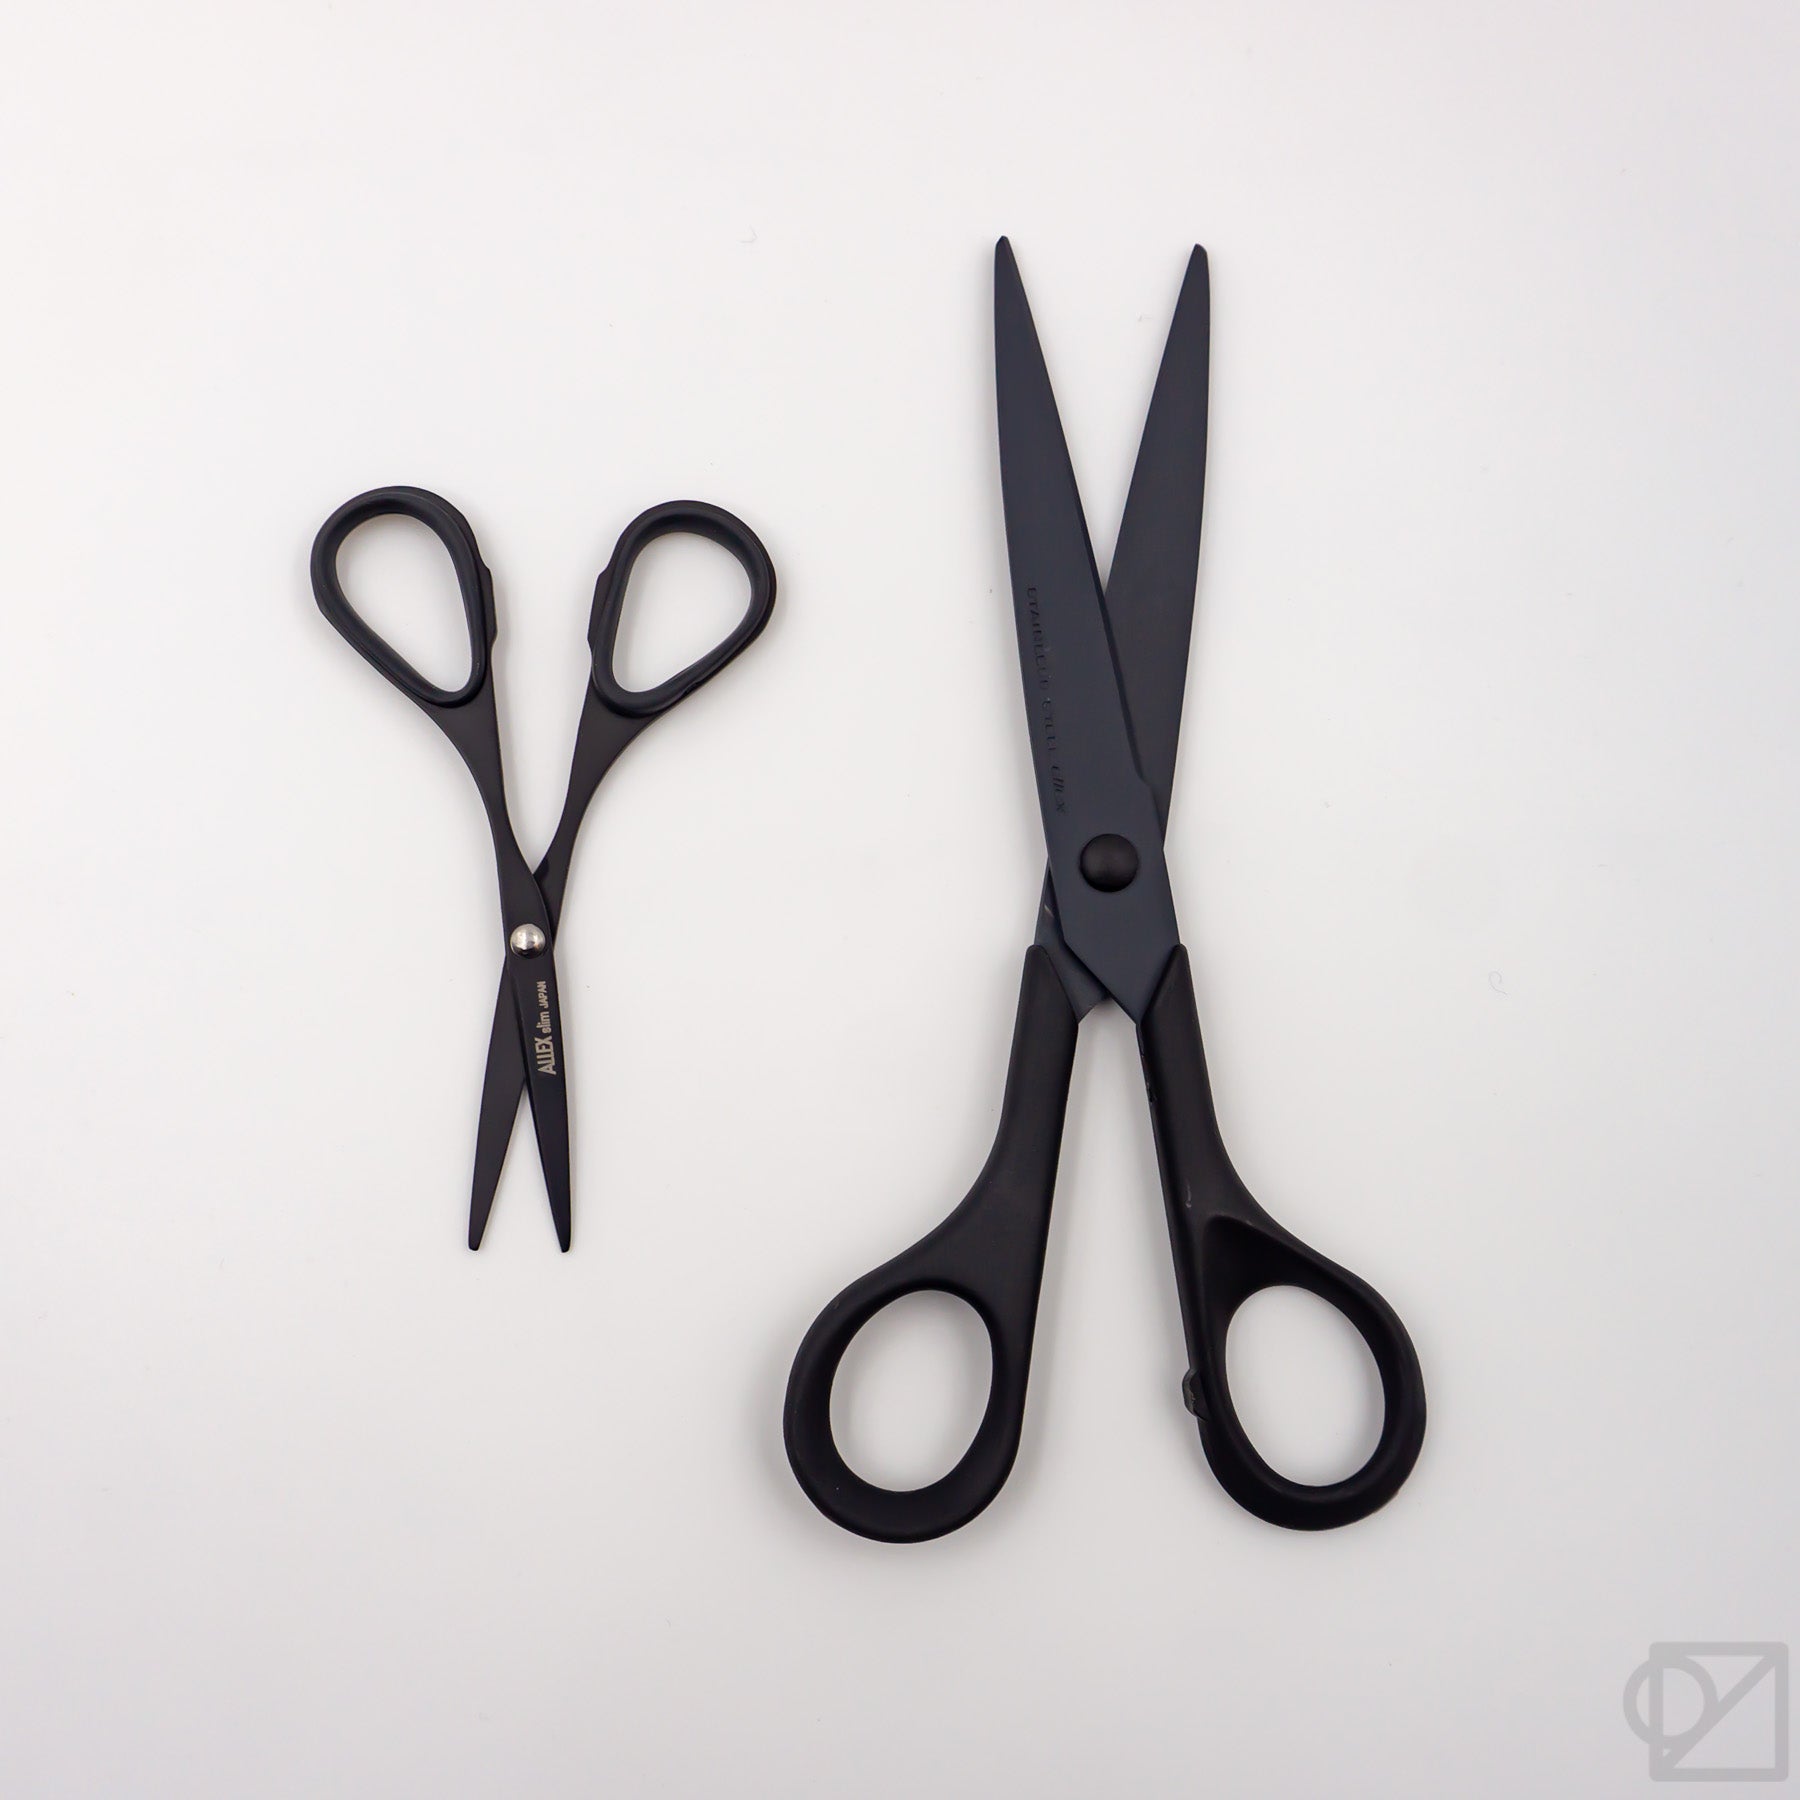 ALLEX Mini Black Scissors for Office 3.9 [Non-Stick], All Purpose Slim &  Thin Low Profile Scissors, Made in JAPAN, All Metal Sharp Japanese  Stainless